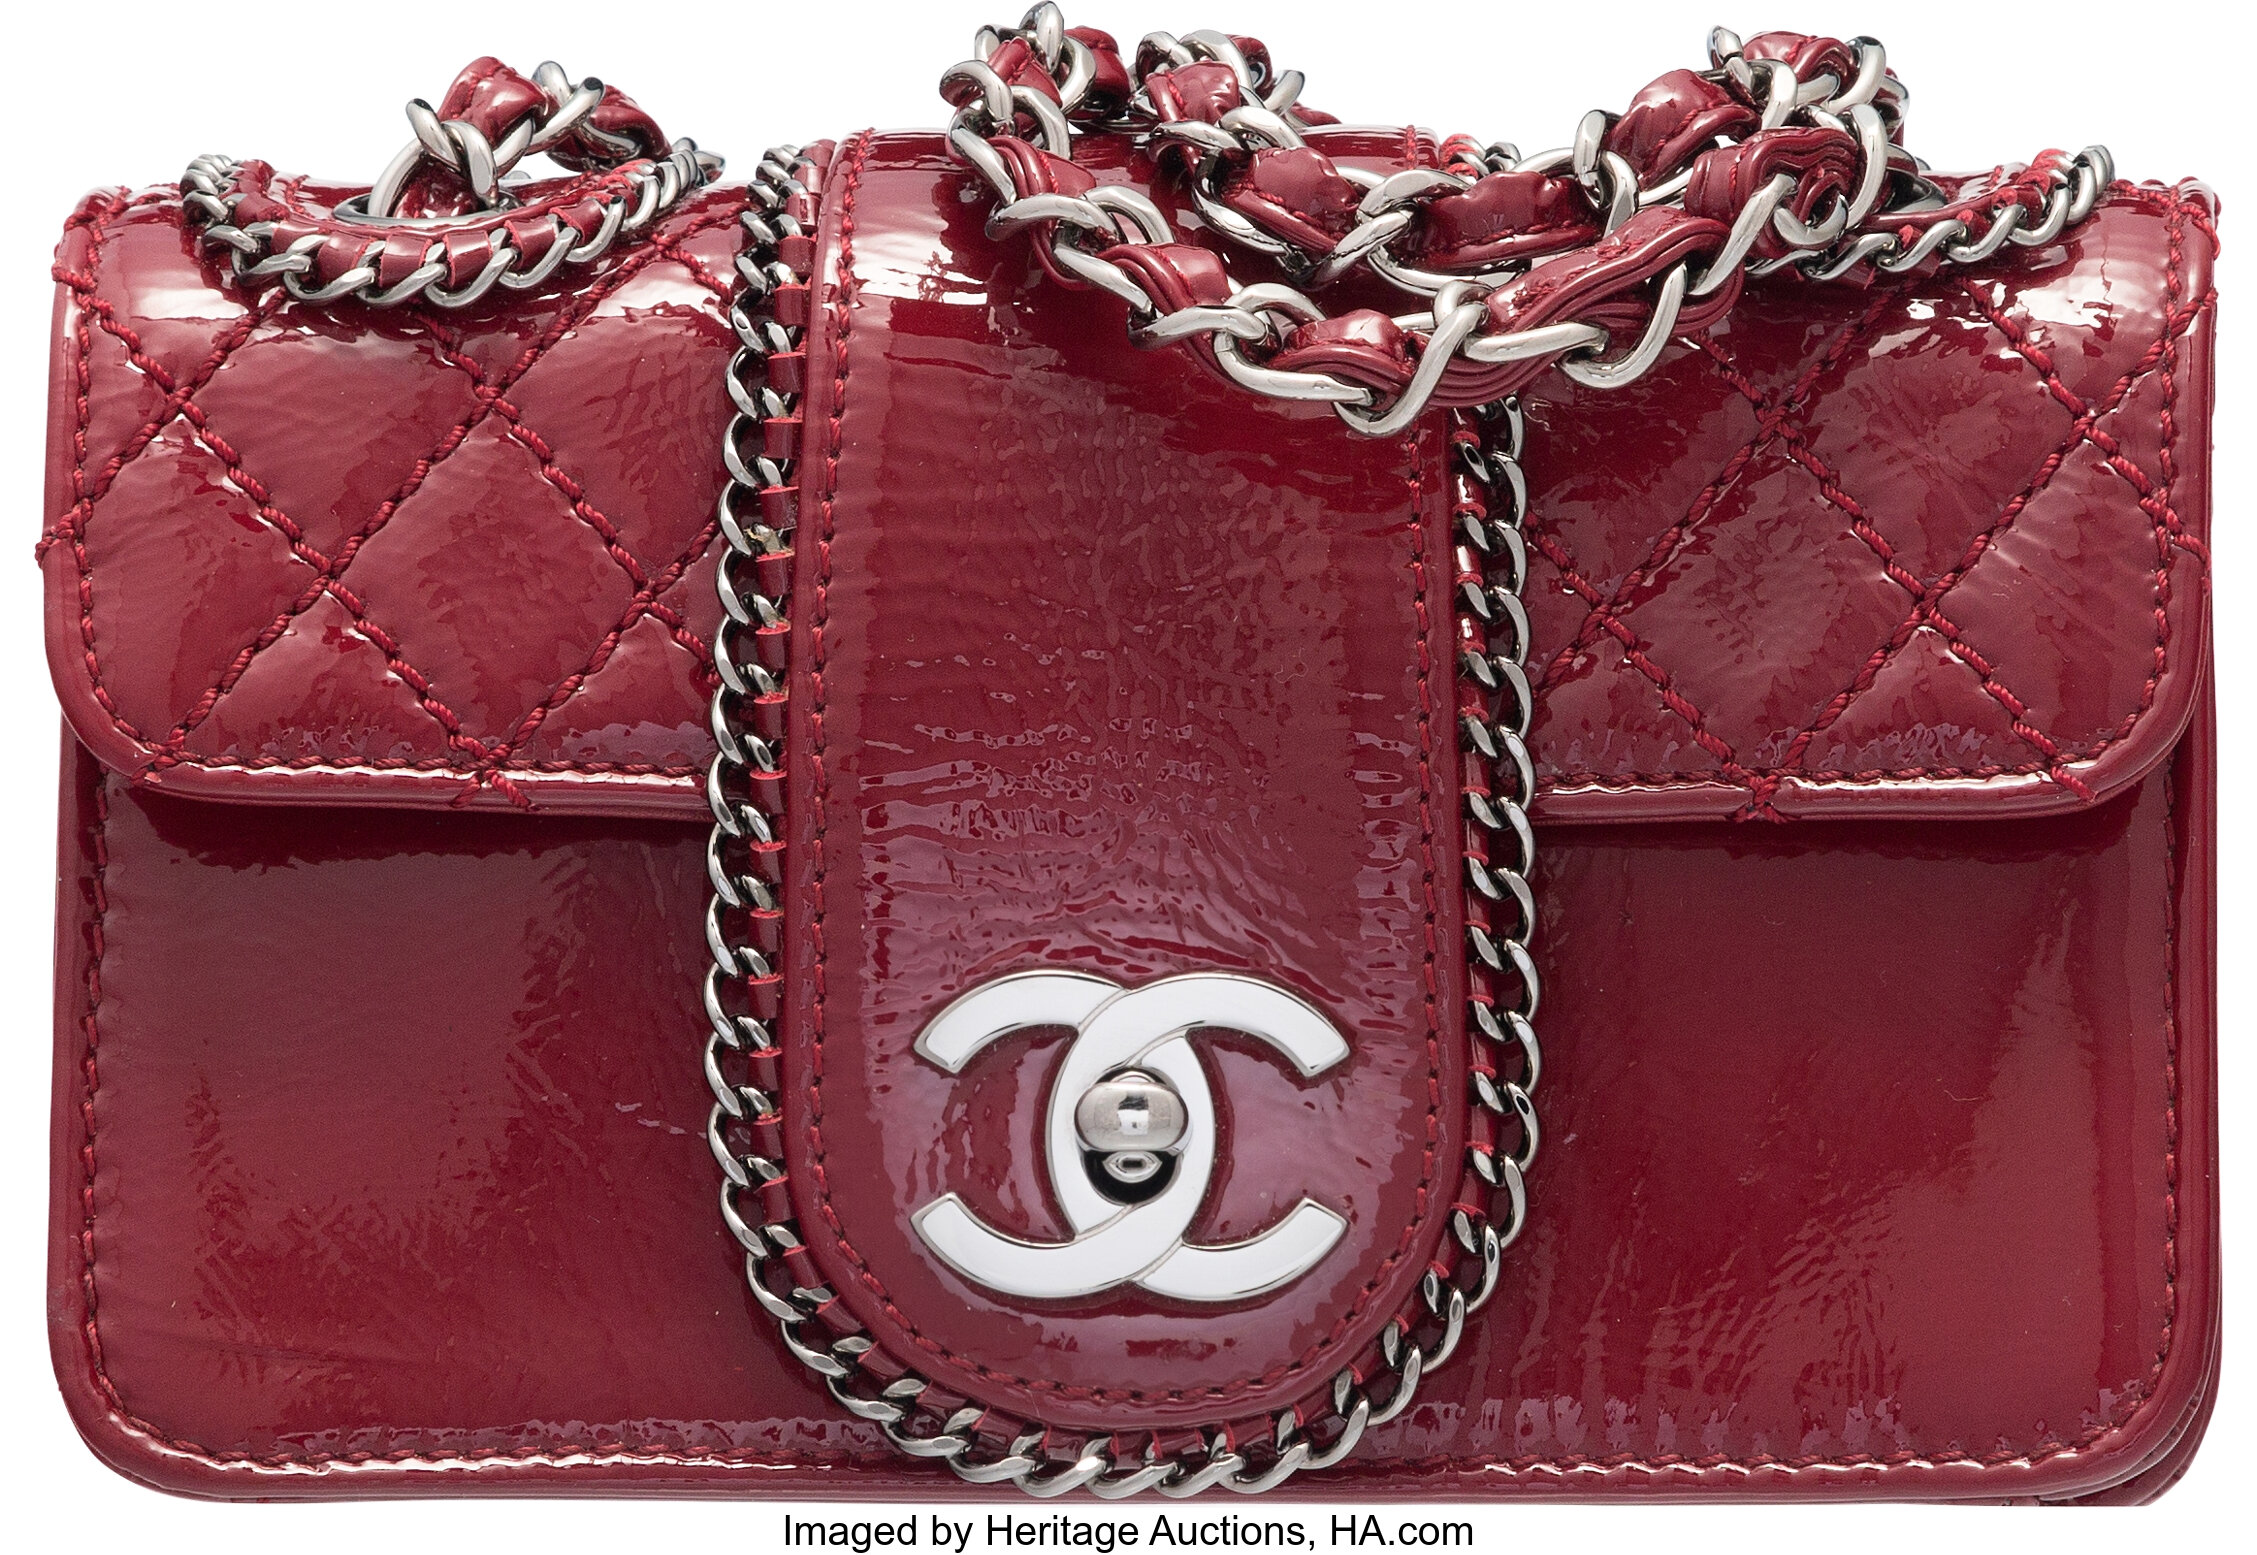 Chanel Red Patent Leather Mini Madison Flap Bag with Ruthenium